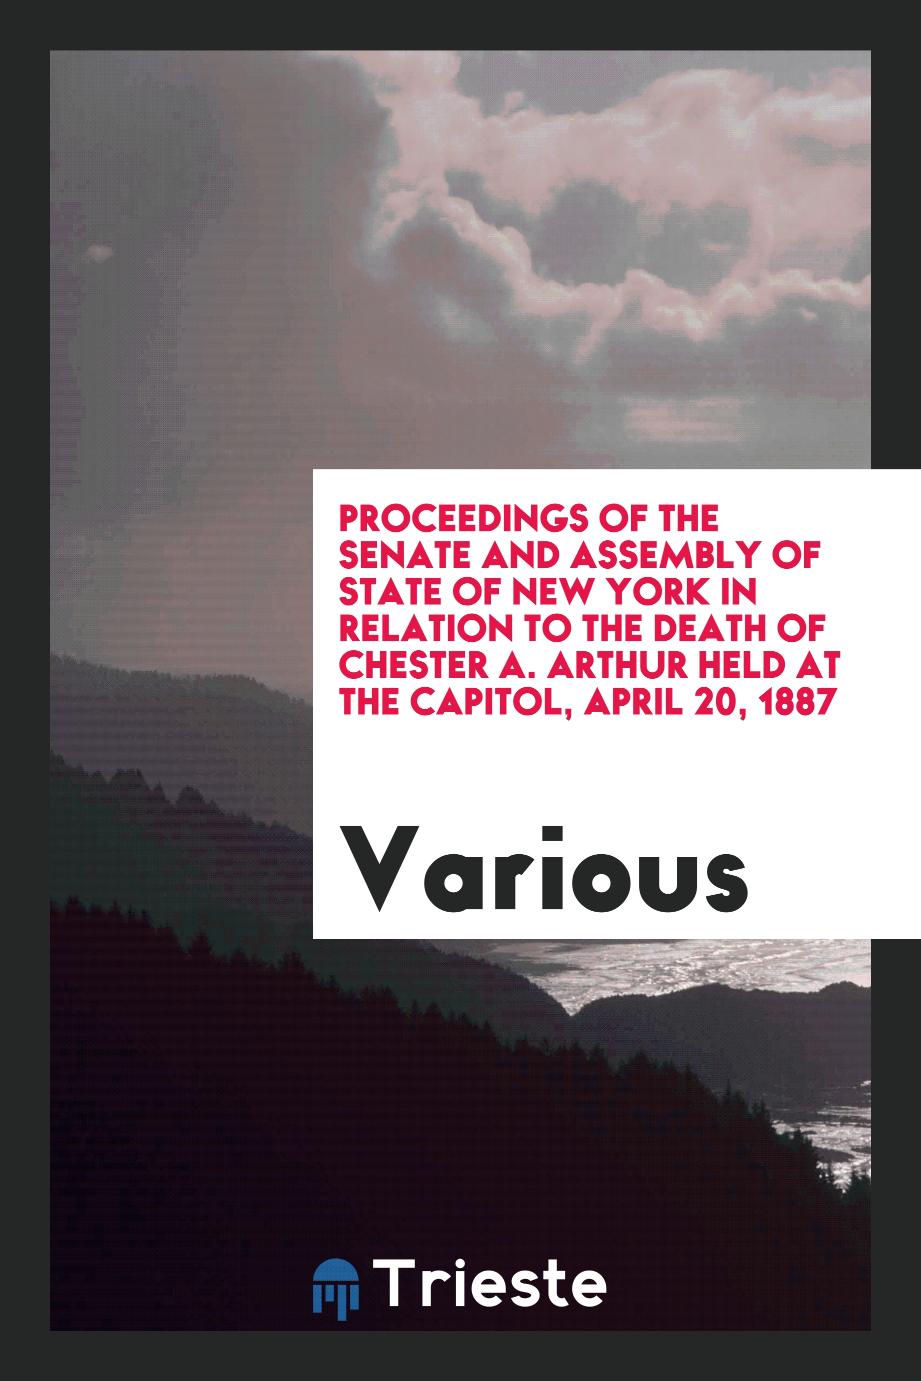 Proceedings of the Senate and Assembly of State of New York in Relation to the death of Chester A. Arthur held at the capitol, April 20, 1887